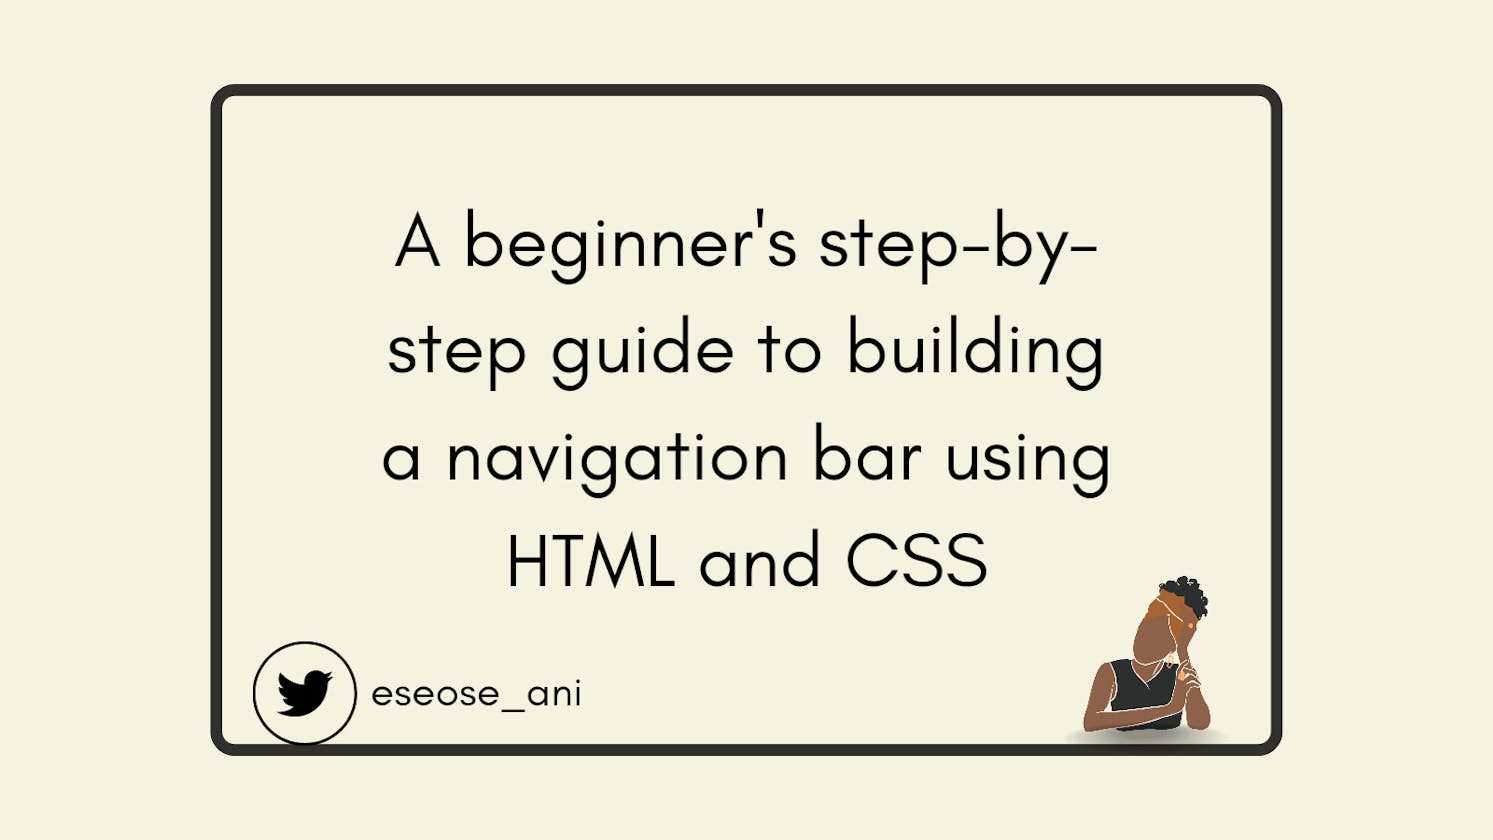 A beginner's step-by-step guide to building a navigation bar using HTML and CSS